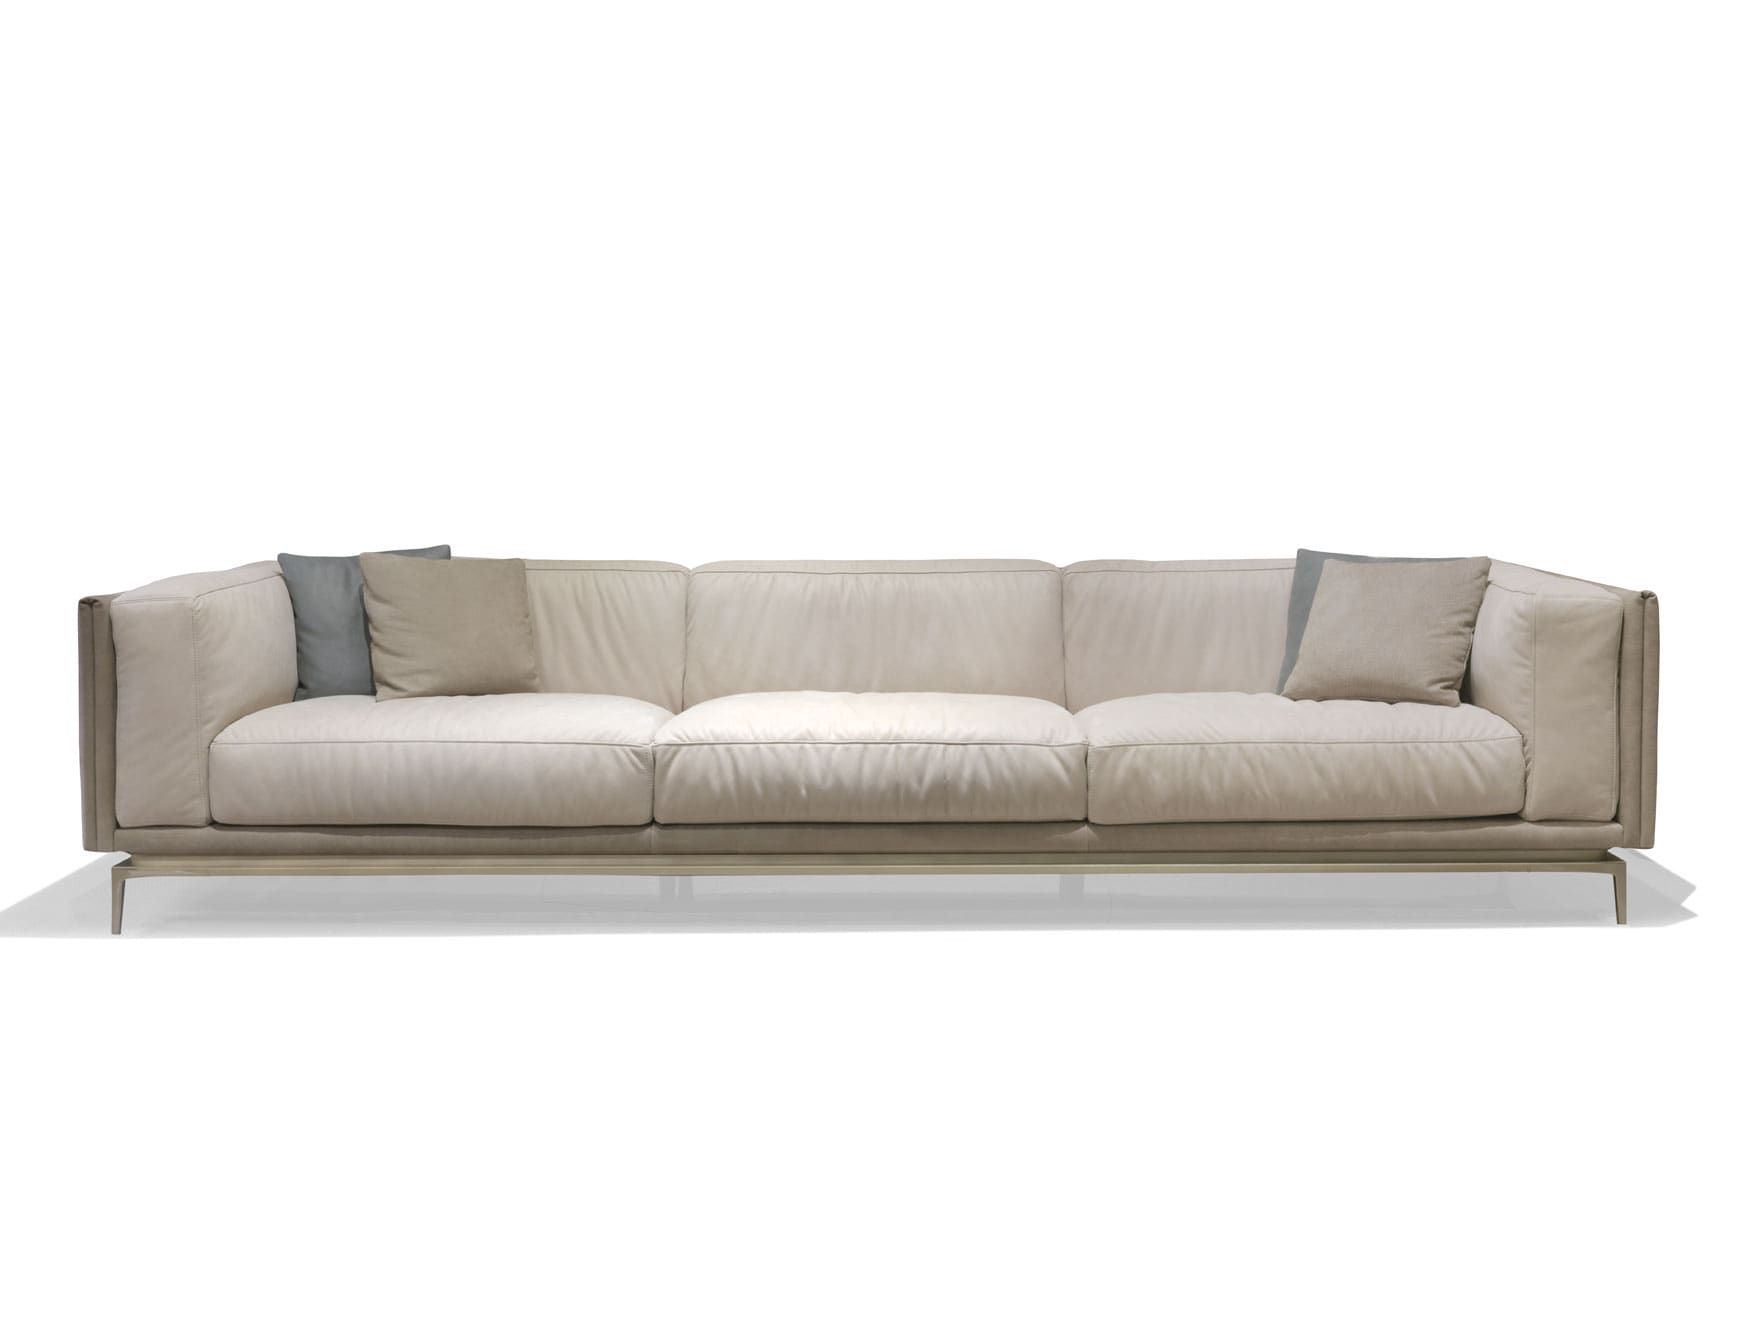 Legend modern luxury sofa chair with cream leather